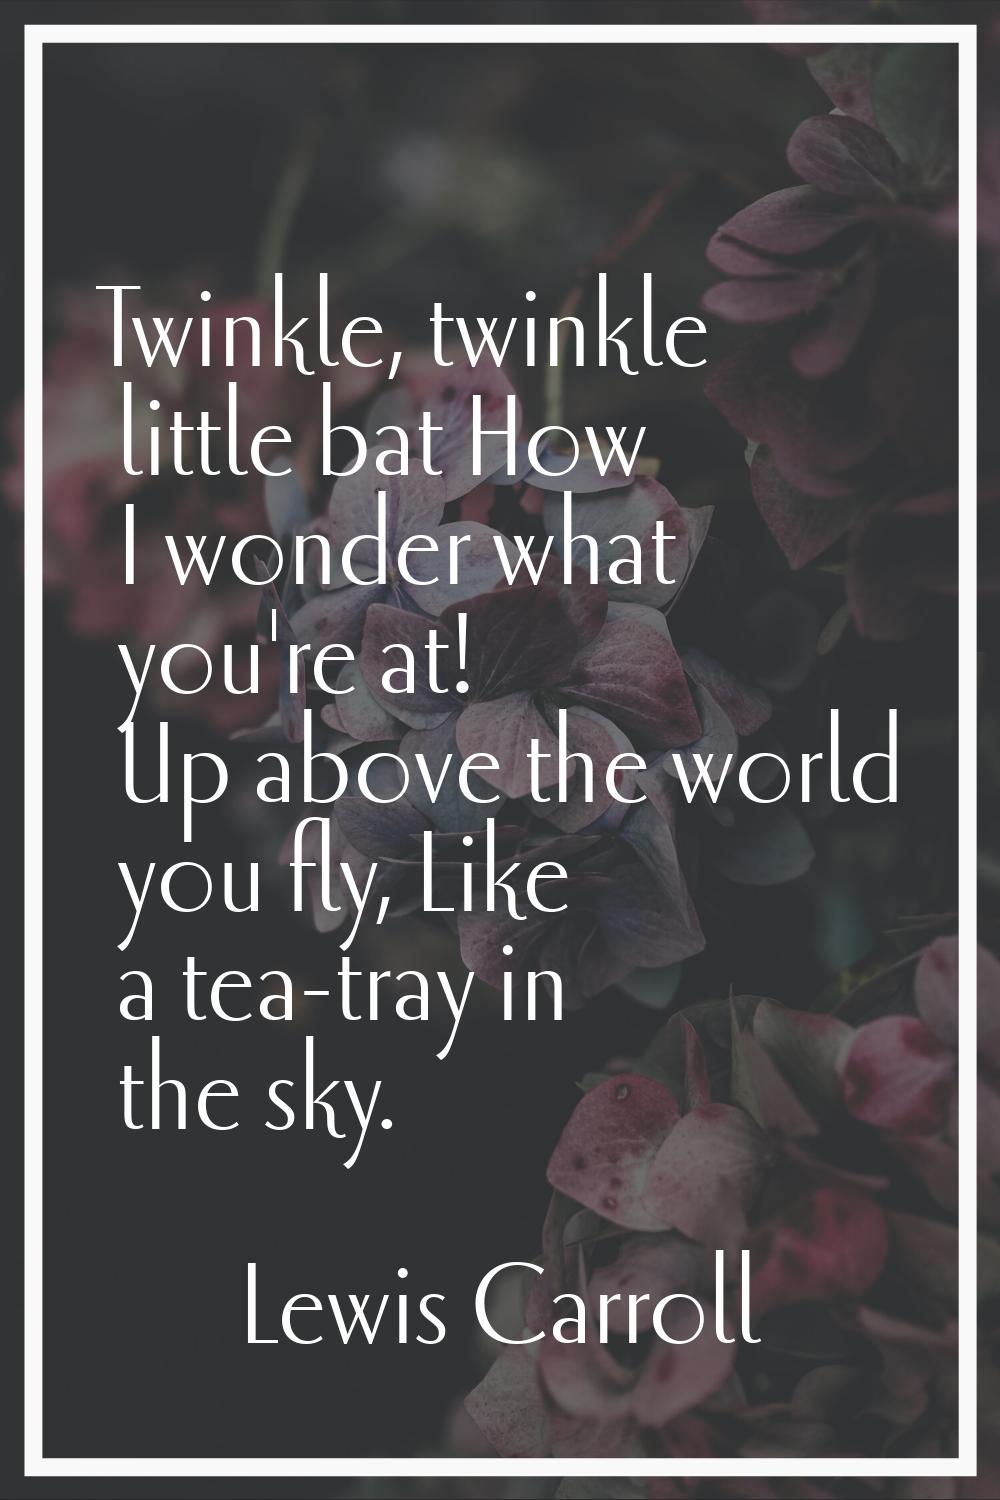 Twinkle, twinkle little bat How I wonder what you're at! Up above the world you fly, Like a tea-tra